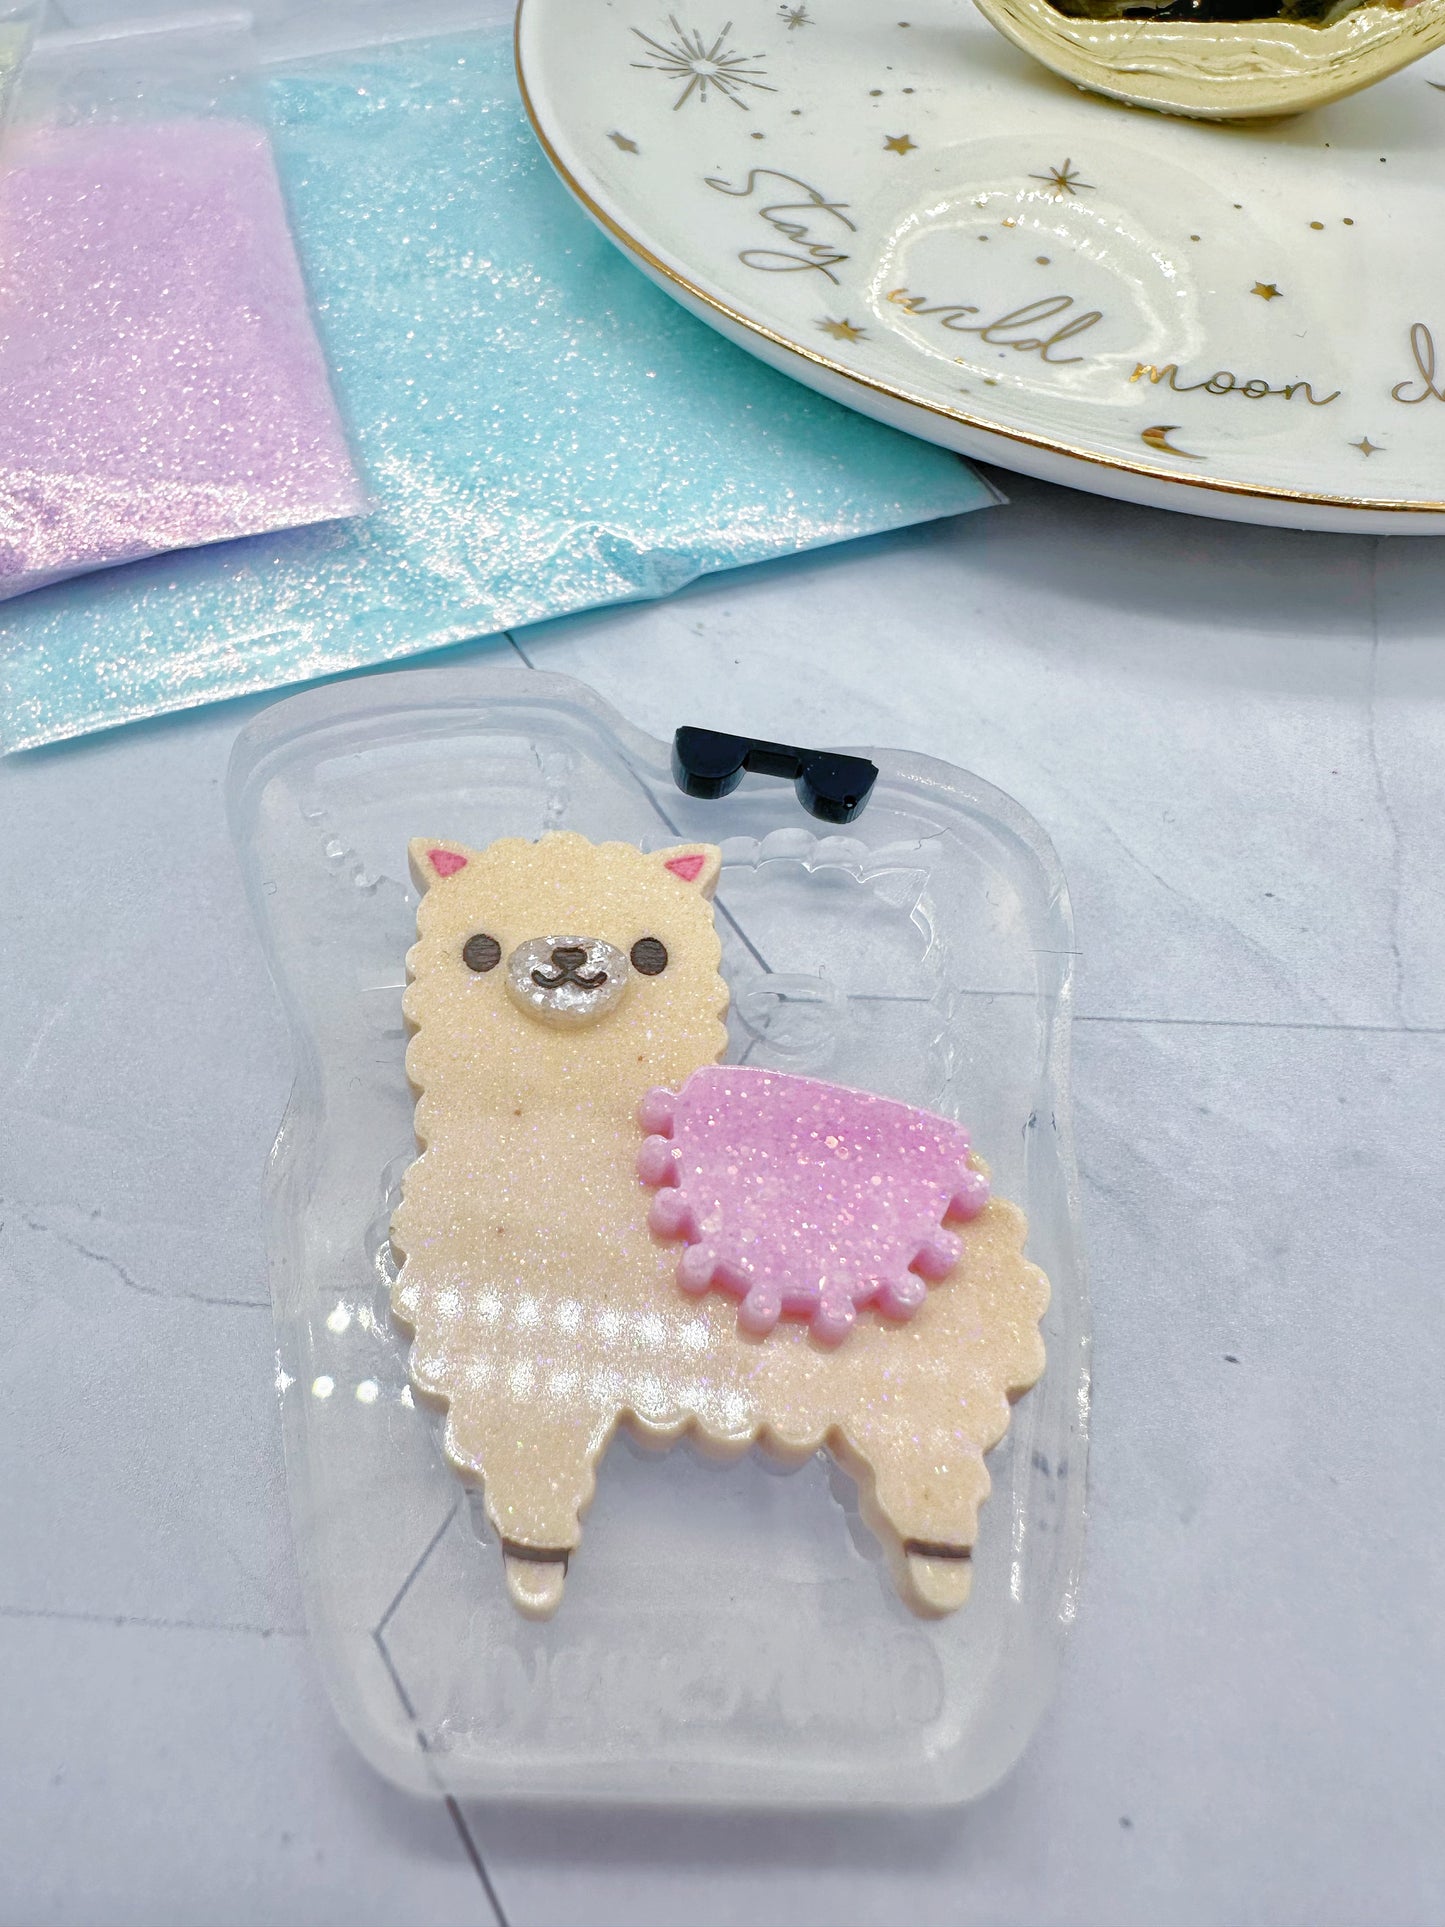 Cute Llama Brooch Mold with Sunglasses & Blanket accessories Clear Silicone Mold for Resin